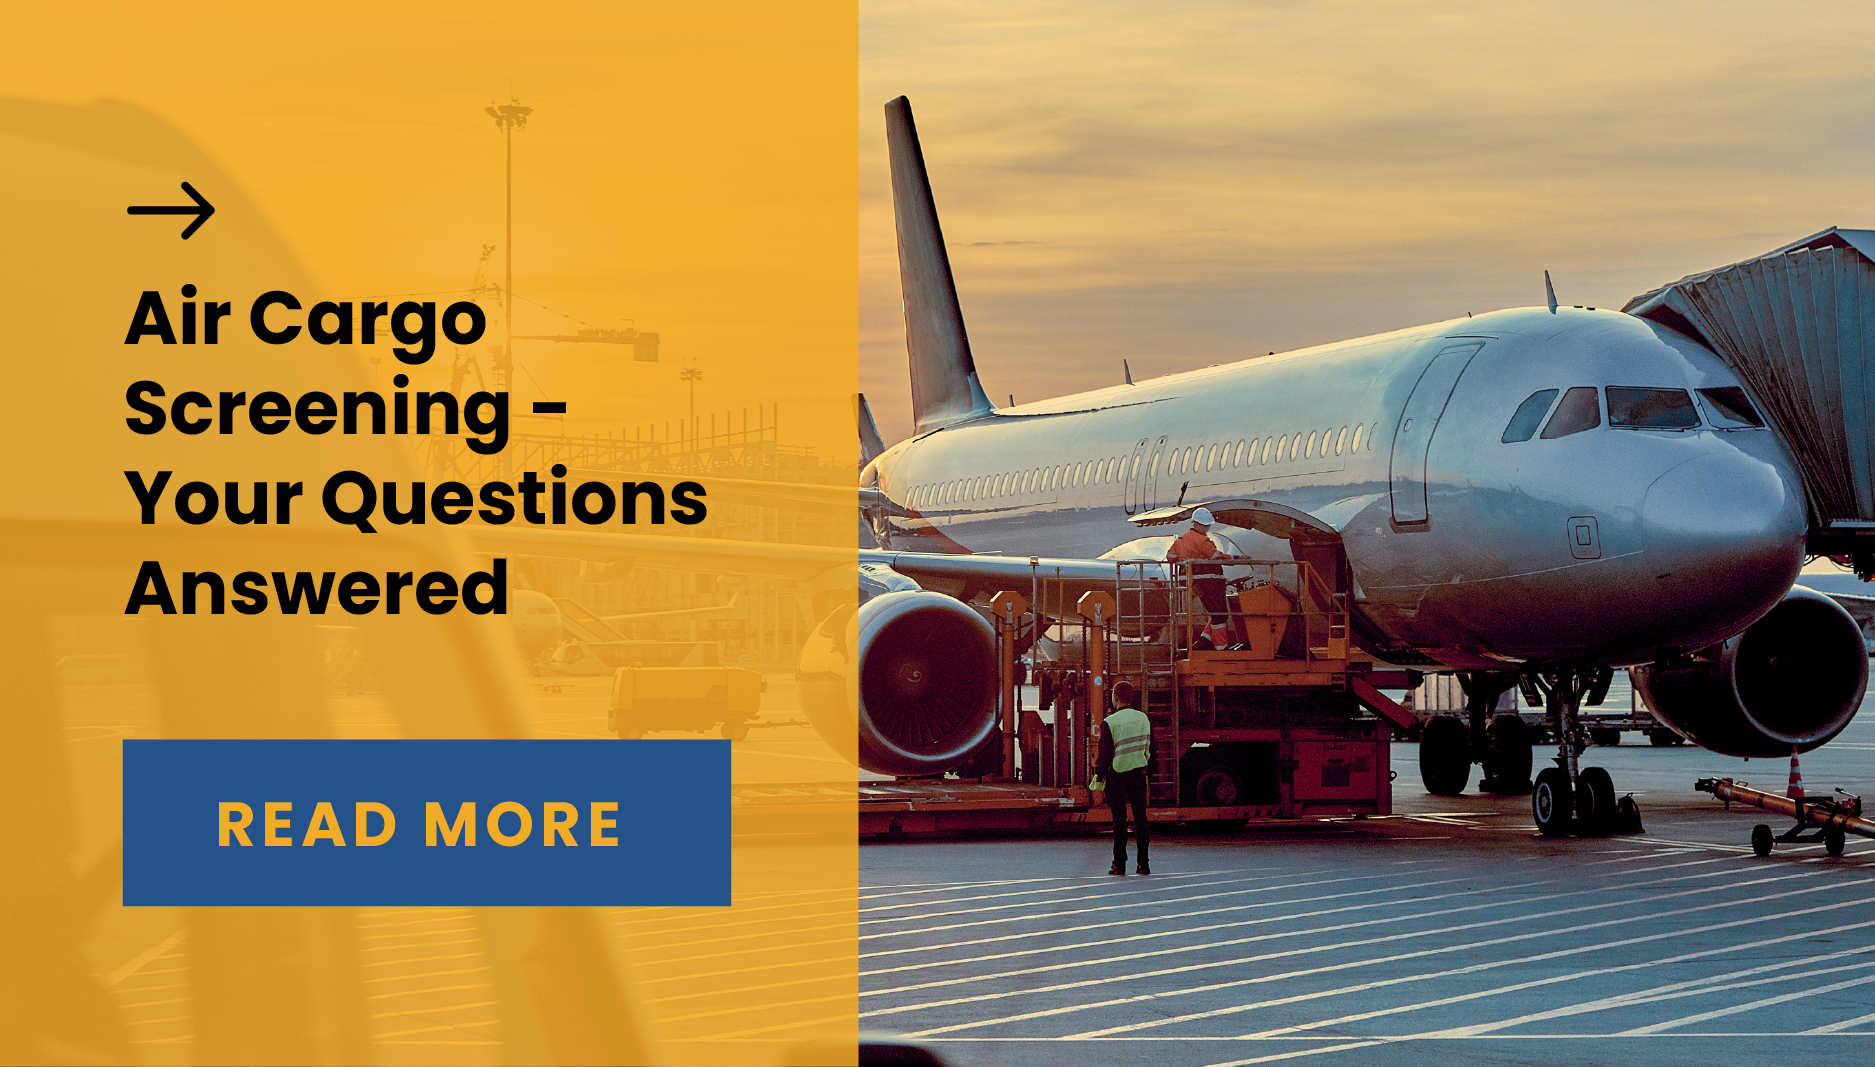 Air Cargo Screening - Your Questions Answered